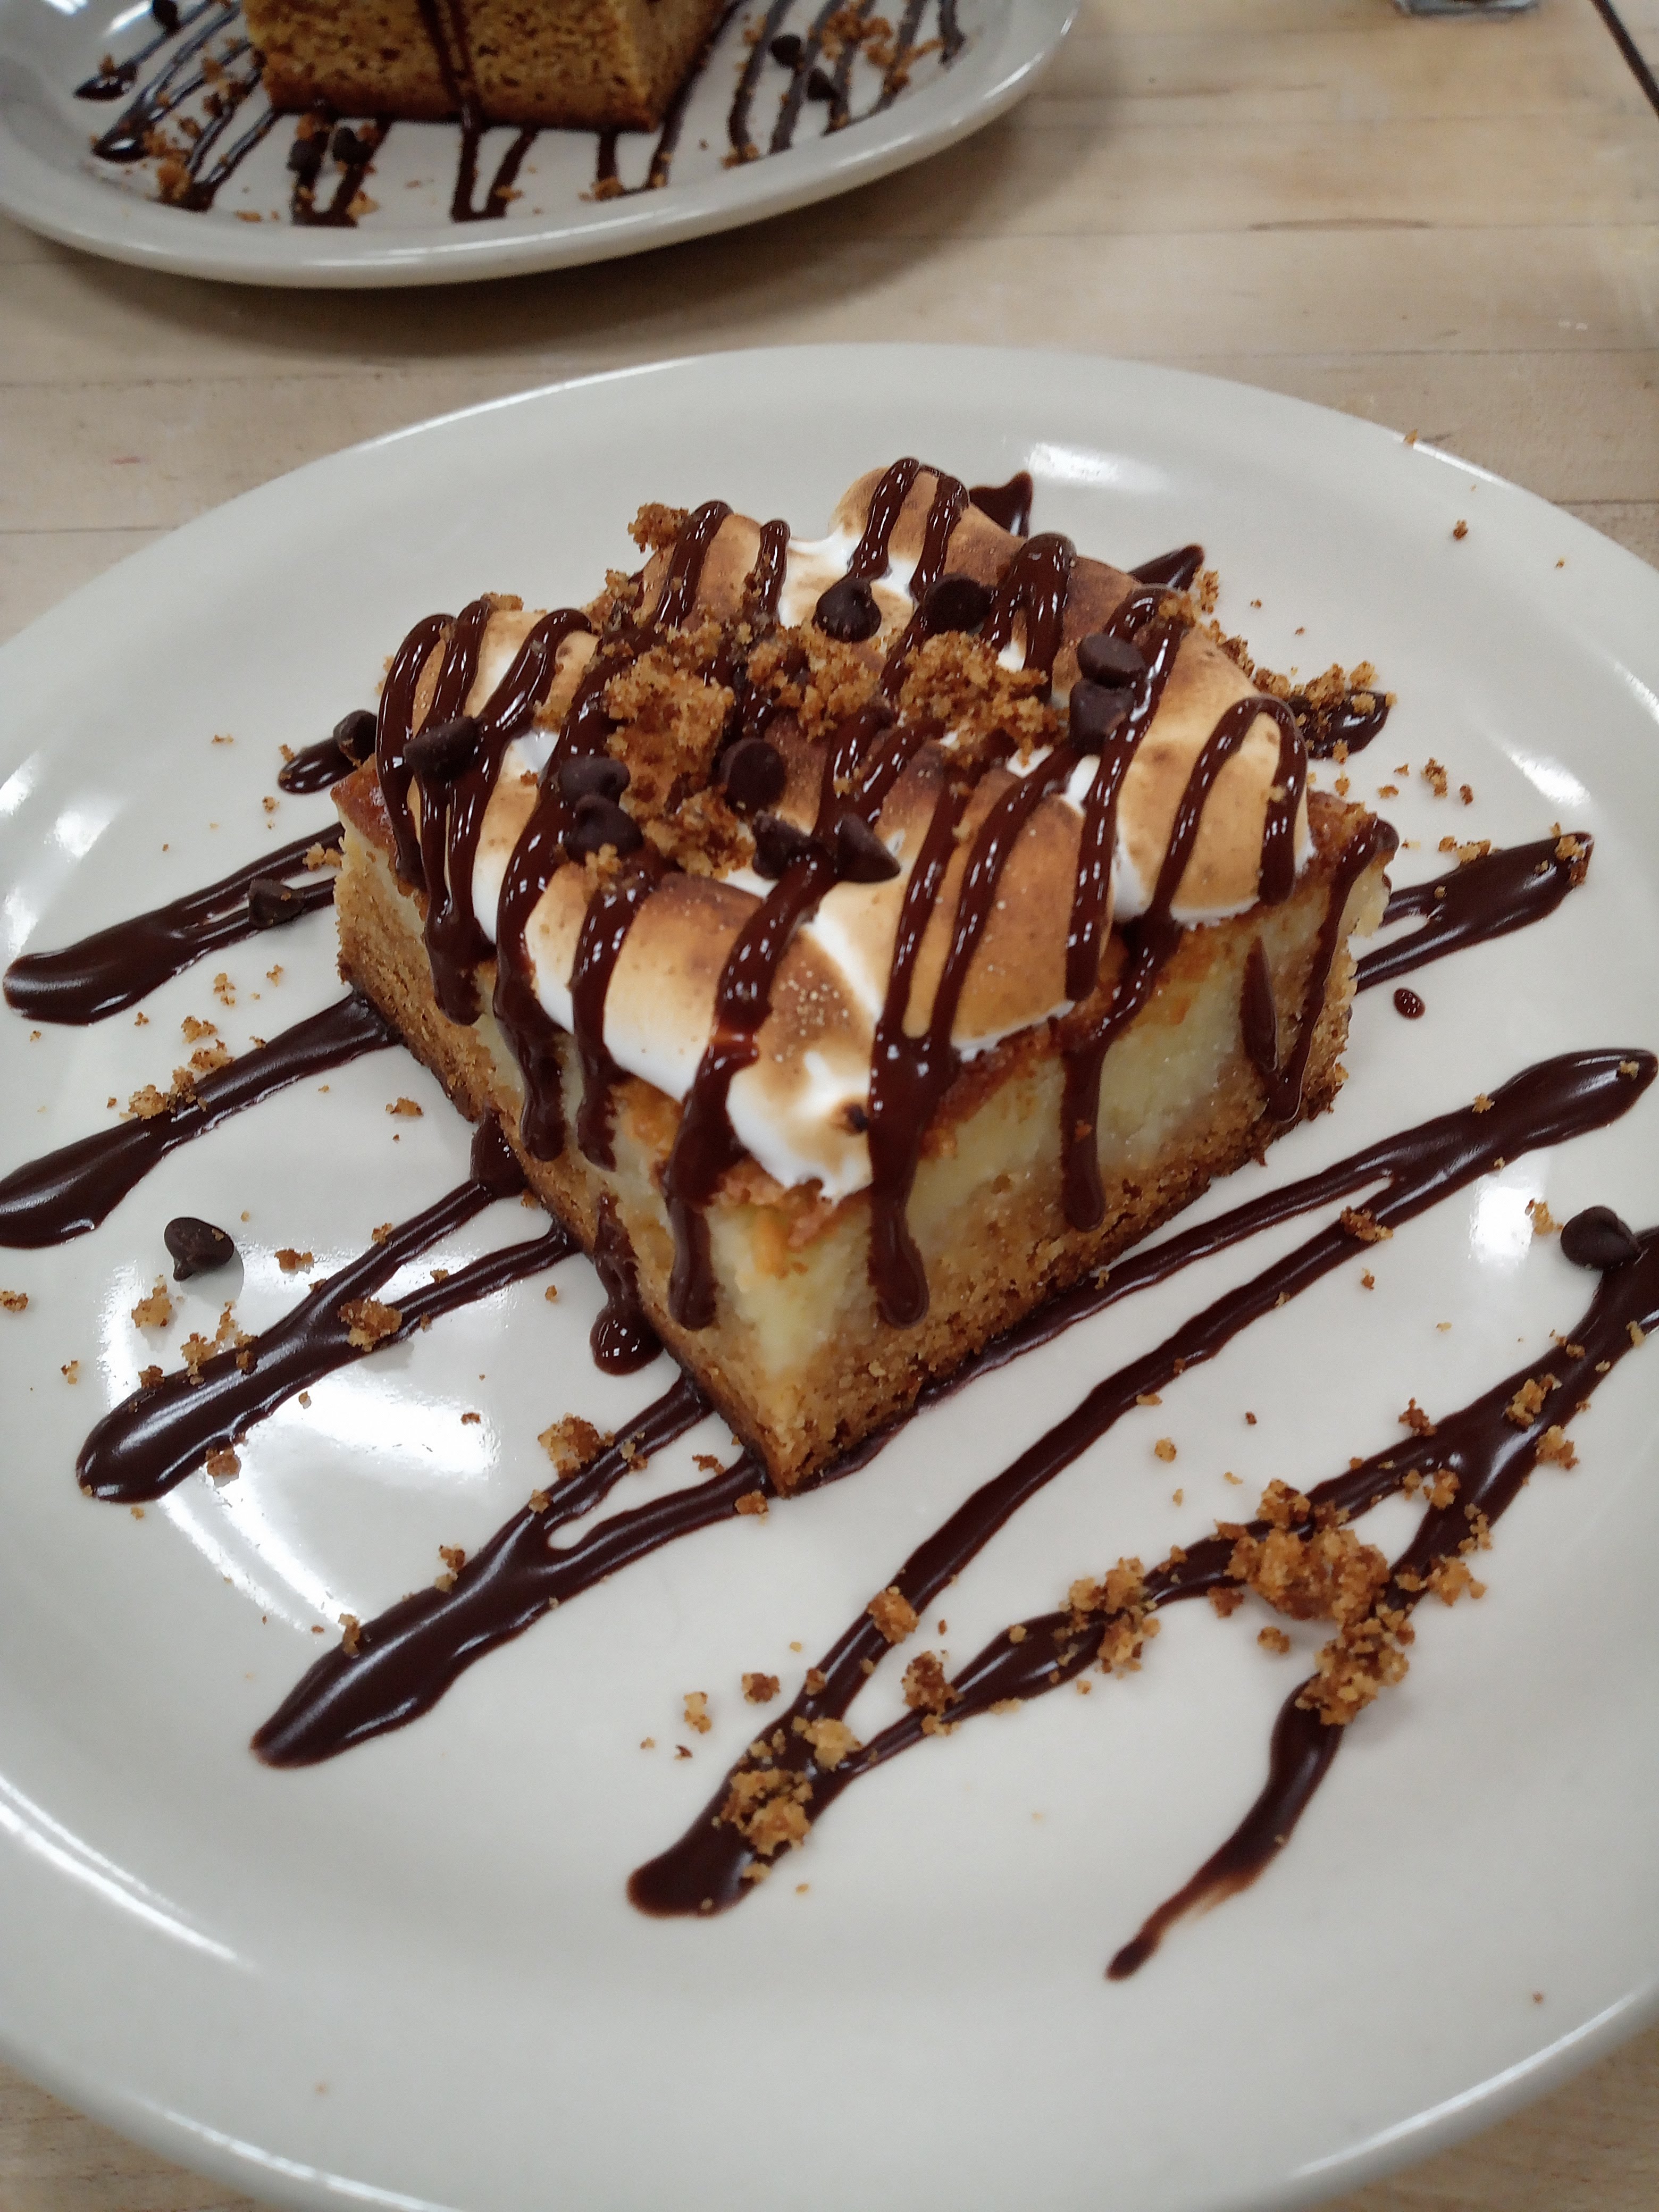 a square-cut piece of a baked dessert on a white plate topped with toasted meringue, drizzled chocolate sauce, chocolate chips, and graham cracker crumb garnish